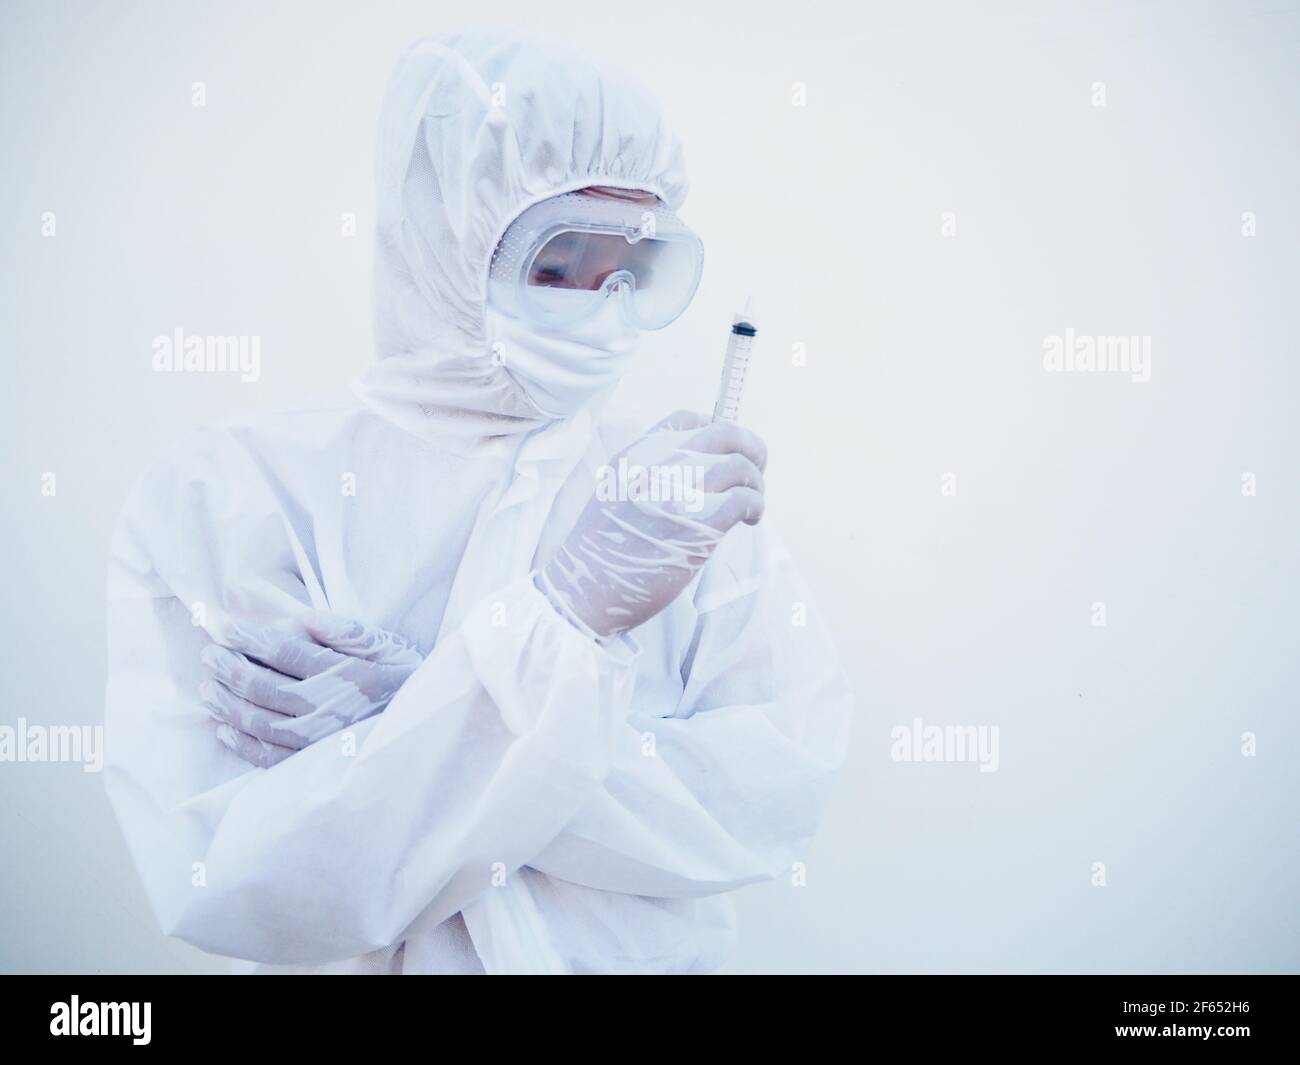 Asian doctor or scientist in PPE suite uniform holding medical injection syringe. coronavirus or COVID-19 concept isolated white background Stock Photo